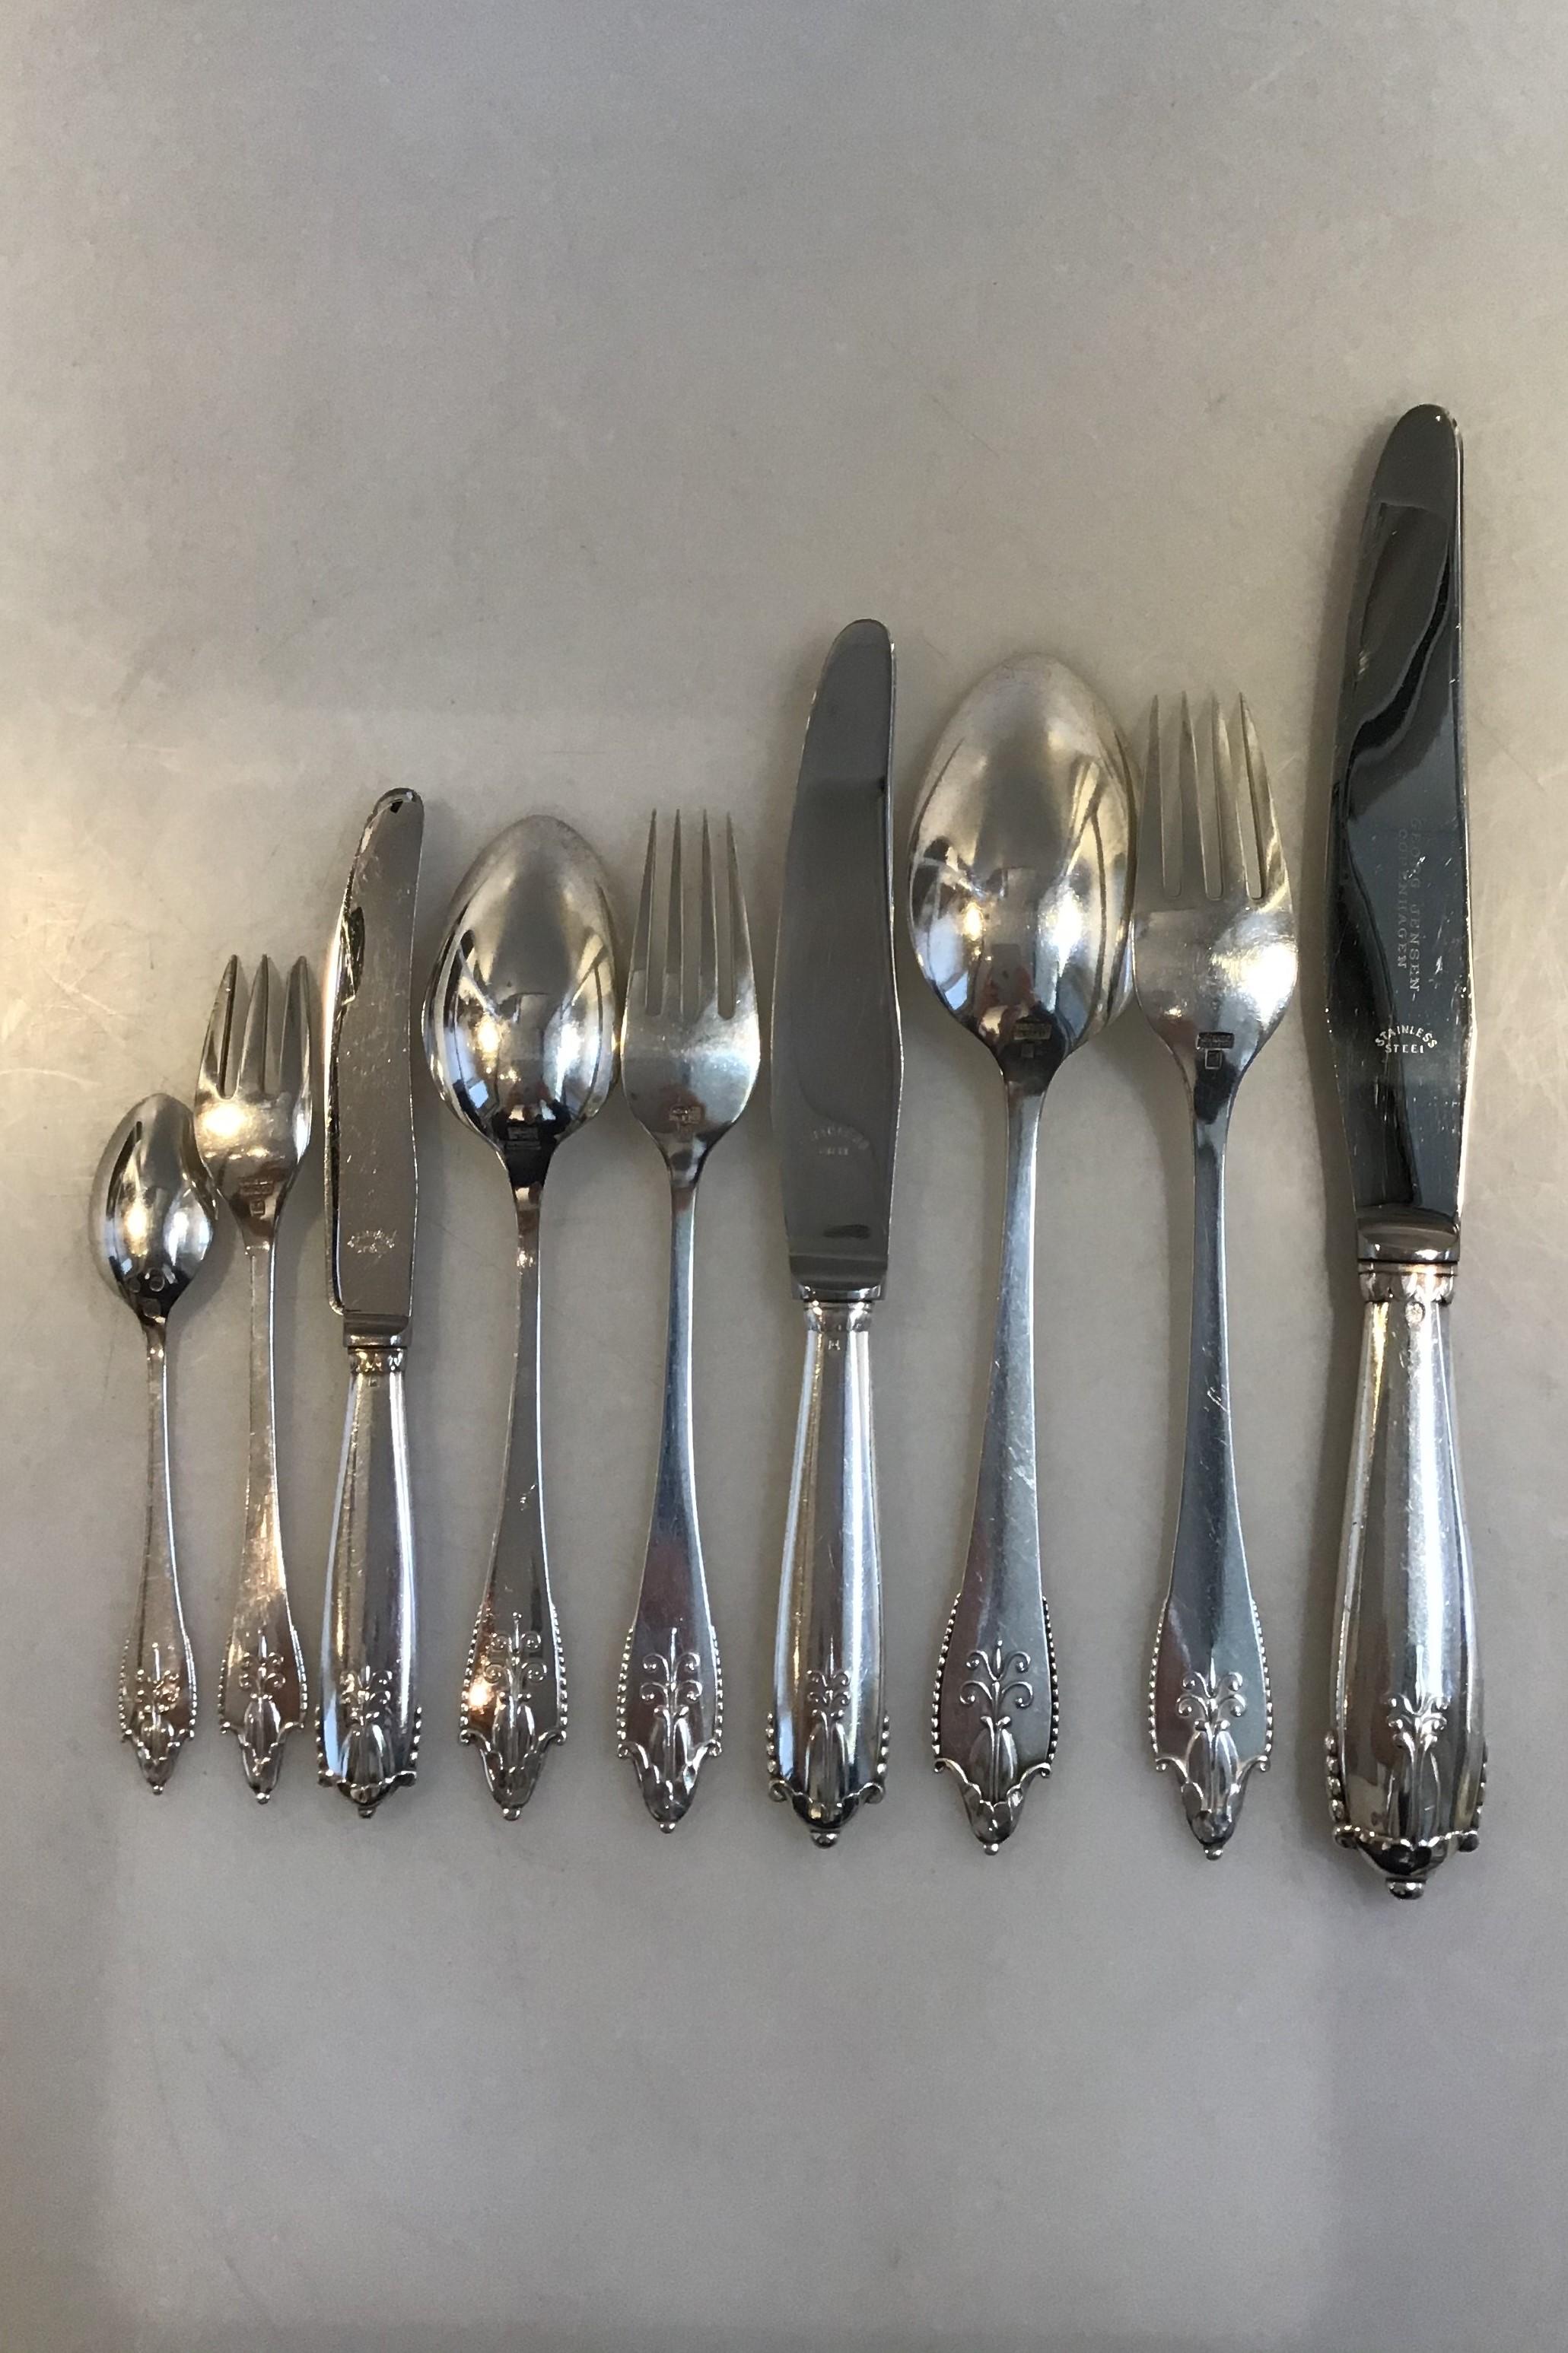 Georg Jensen silver/sterling silver Akkeleje set for 12 people (108 pcs)

Set consists of
12 x dinner knives, L 25 cm(9 27/32 in)
12 x dinner forks, L 19.8 cm(7 51/64 in)
12 x dinner spoons, L 20.2 cm(7 61/64 in)
12 x Luncheon knives, L 20.2